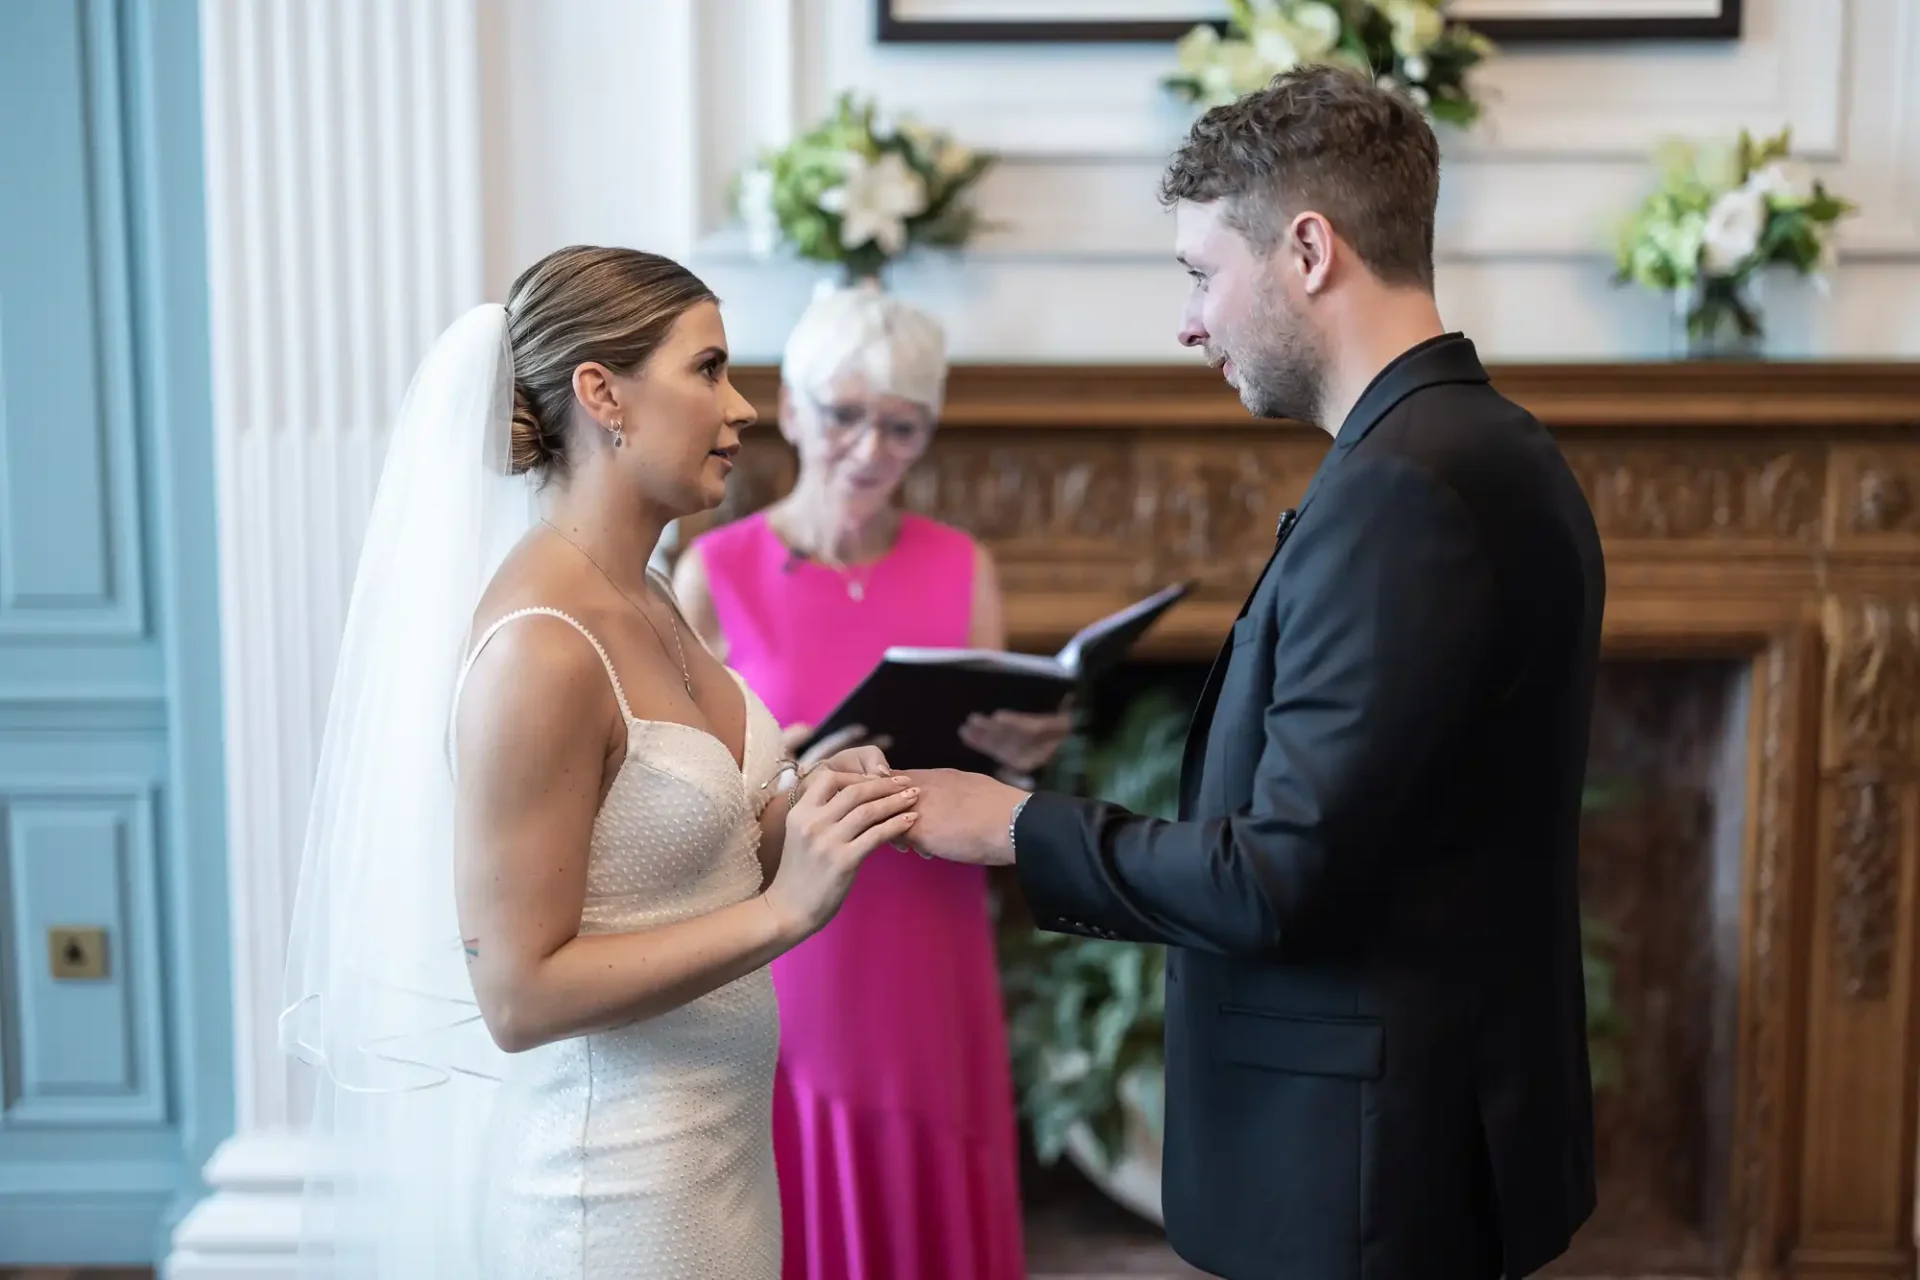 A bride and groom exchange vows in a sophisticated room with an officiant in pink reading from a book.